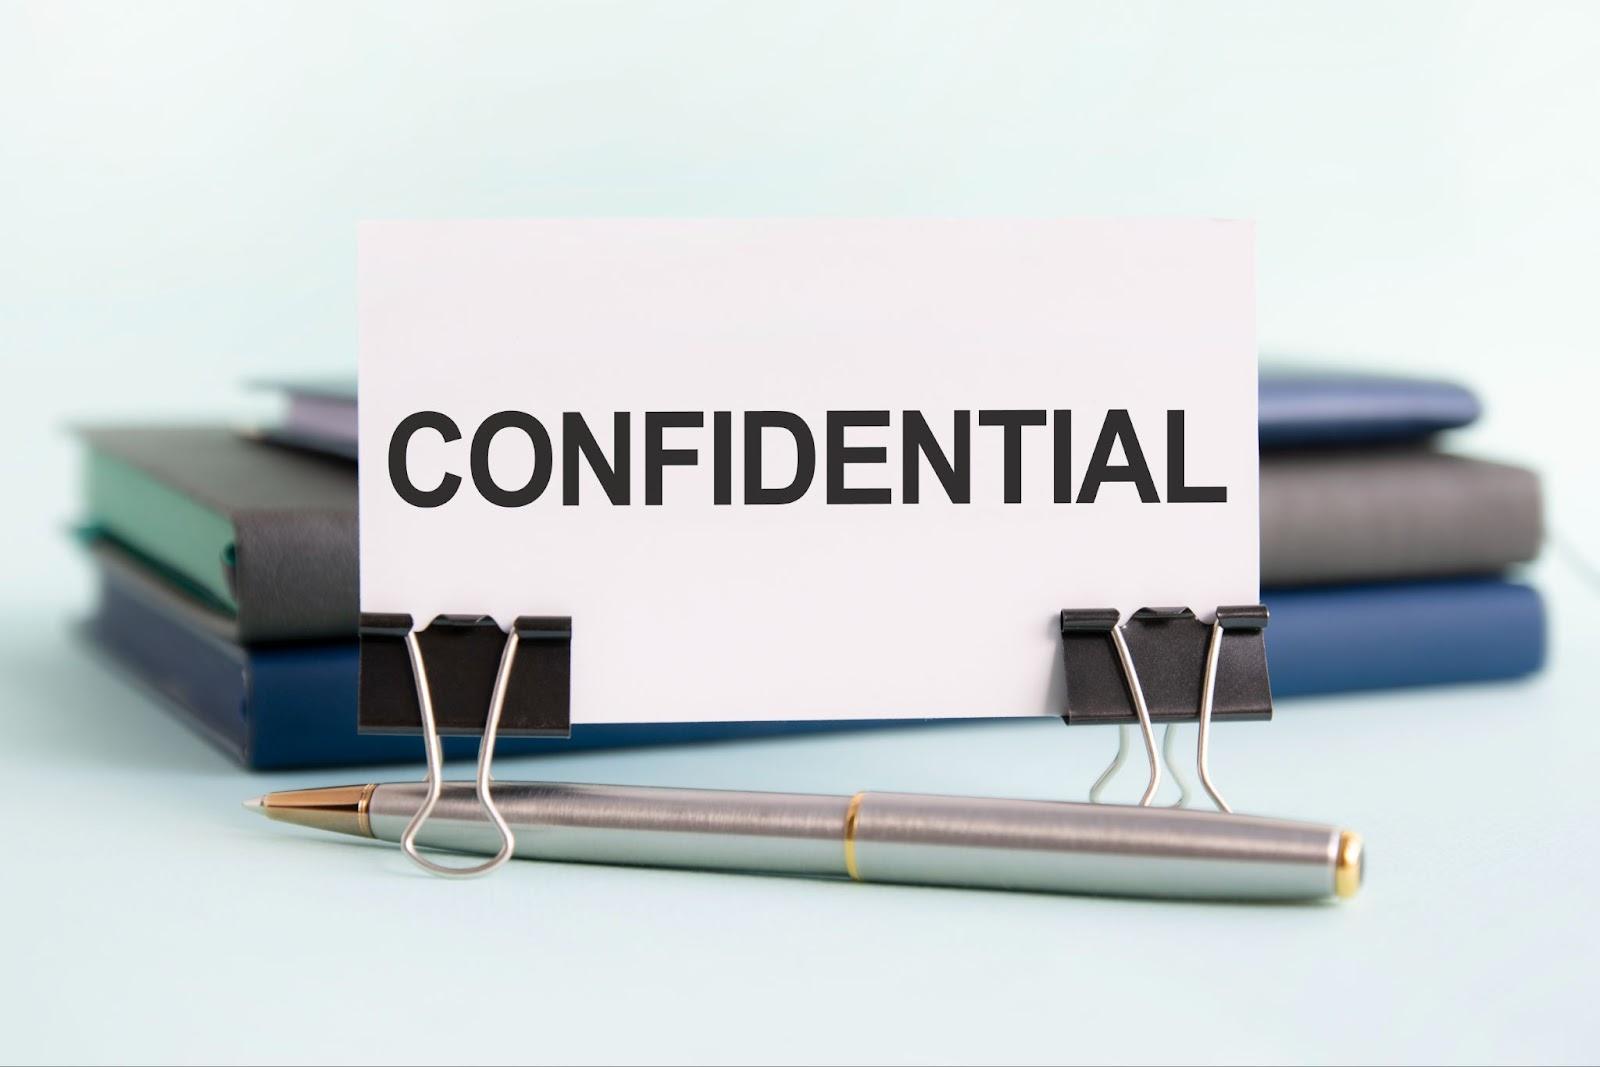 A card labeled "confidential" clipped to a pen in front of stacked notebooks